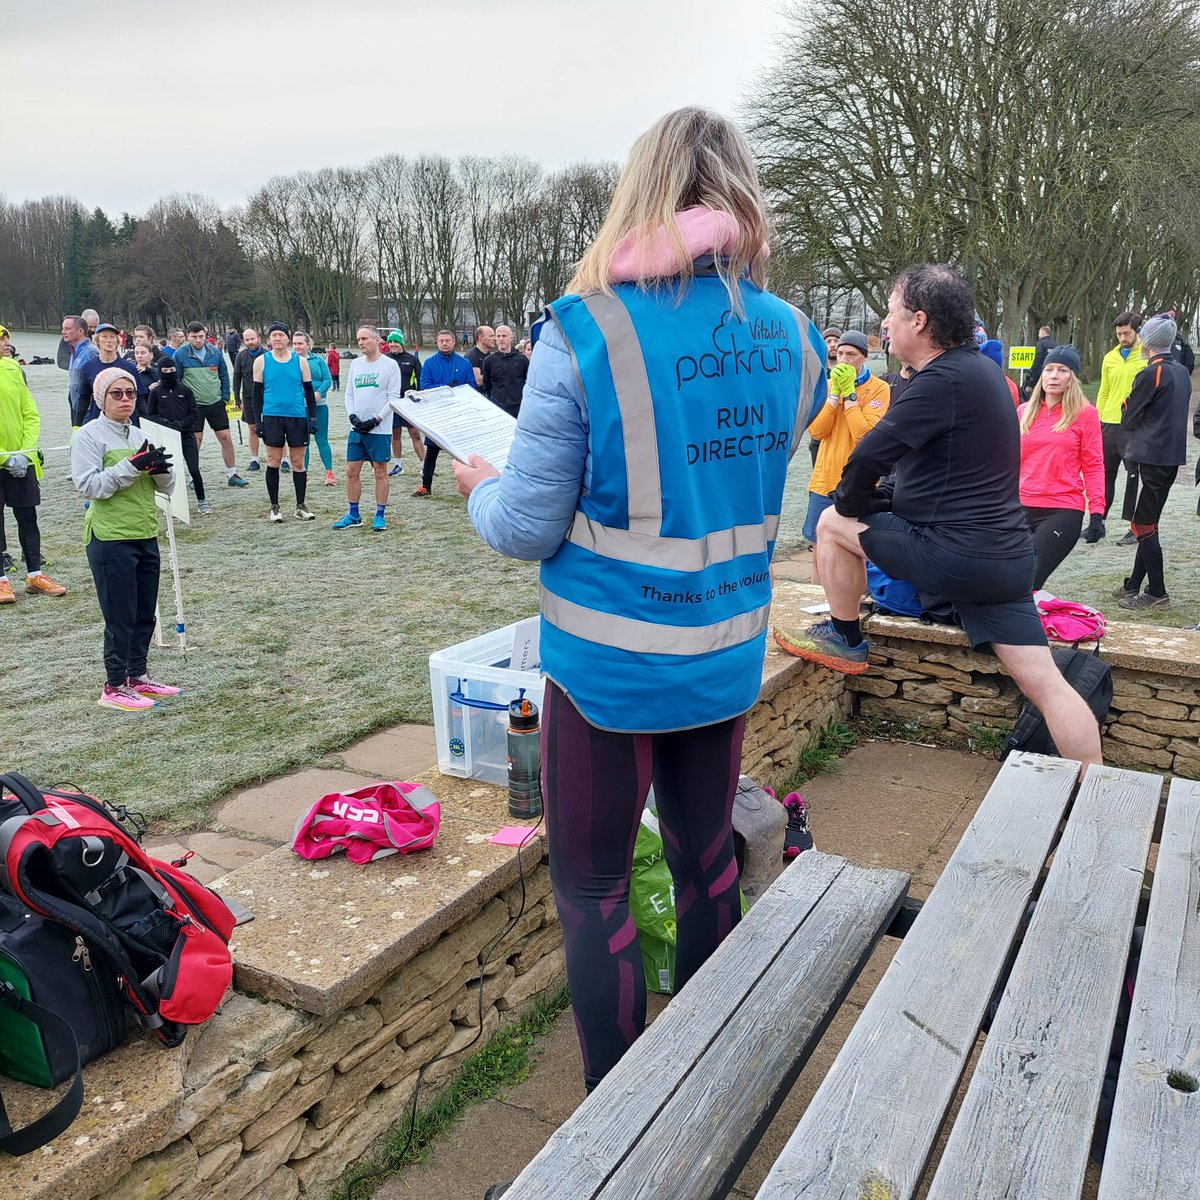 🥶 Happy parkrunDay! 🥶
What a chilly one! ❄️ We're impressed that 230 of you joined us for a walk, run or jog this morning 🏃‍♀️🚶 A huge THANK YOU to our 30 fabulous hi-vis heroes too, led by Rachel who - as expected - was brilliant in her first ever RD shift 🦸‍♀️🦸‍♂️
#loveparkrun 🌳